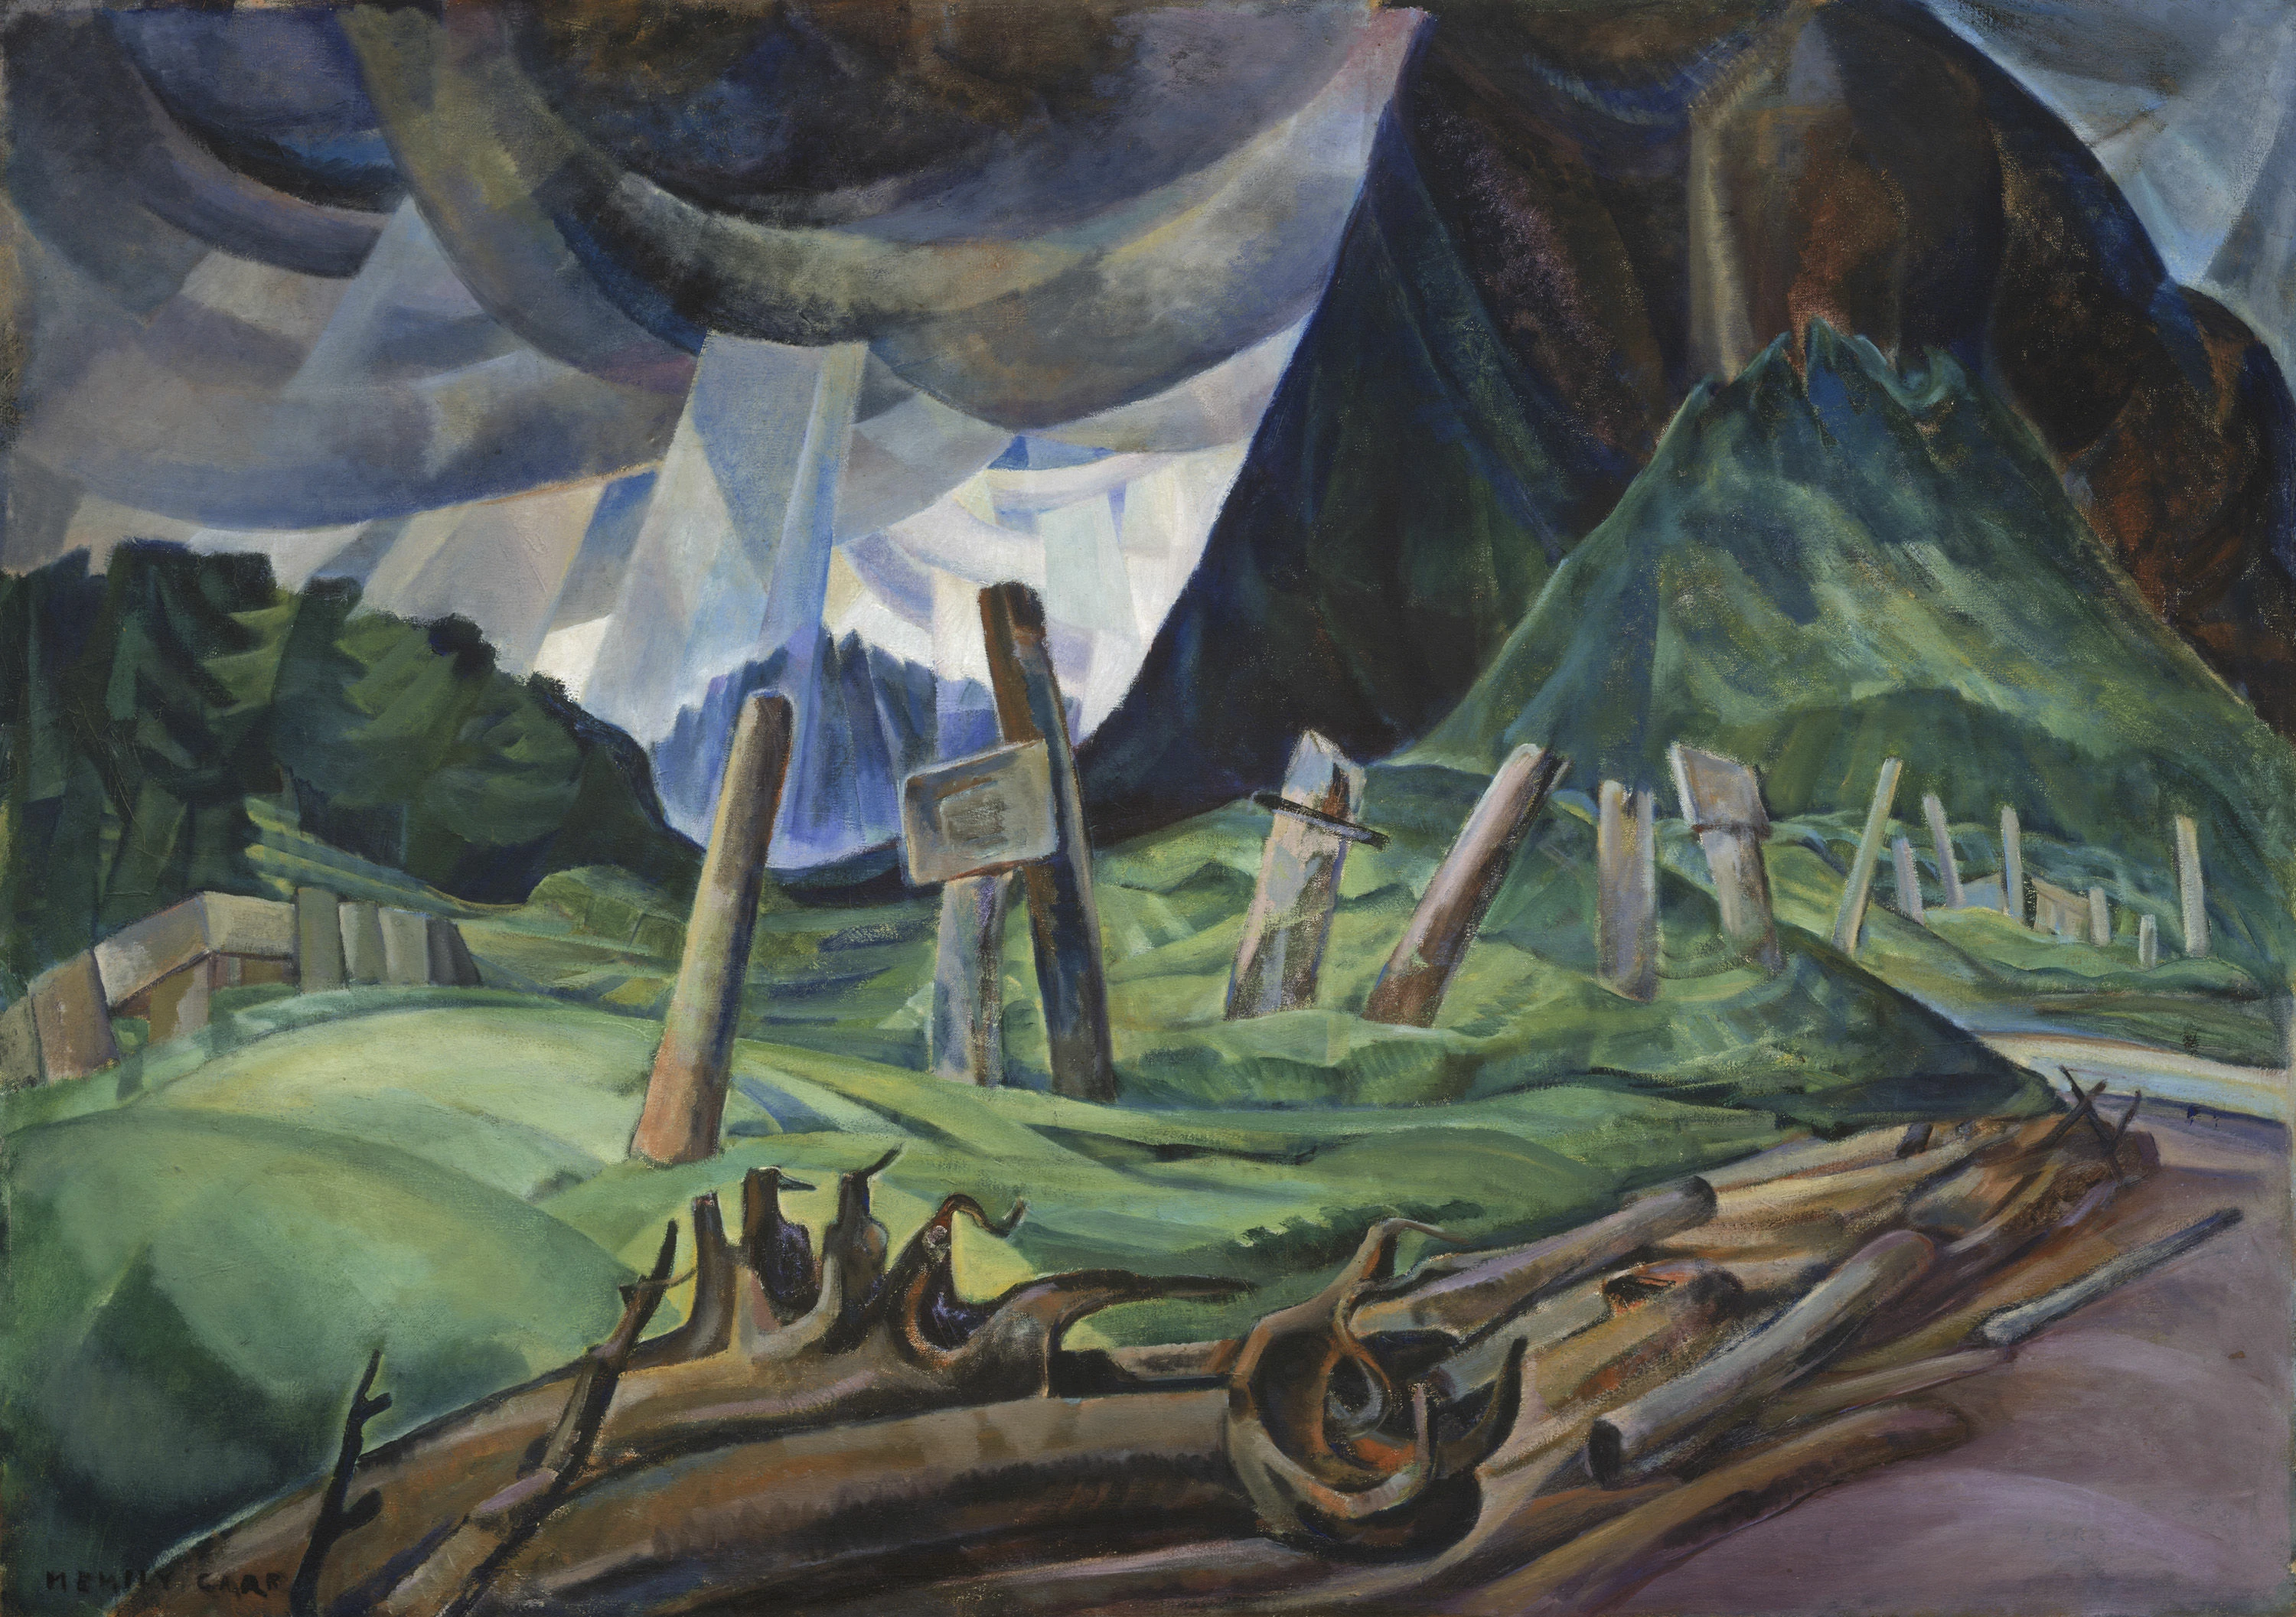 Vanquished, Emily Carr